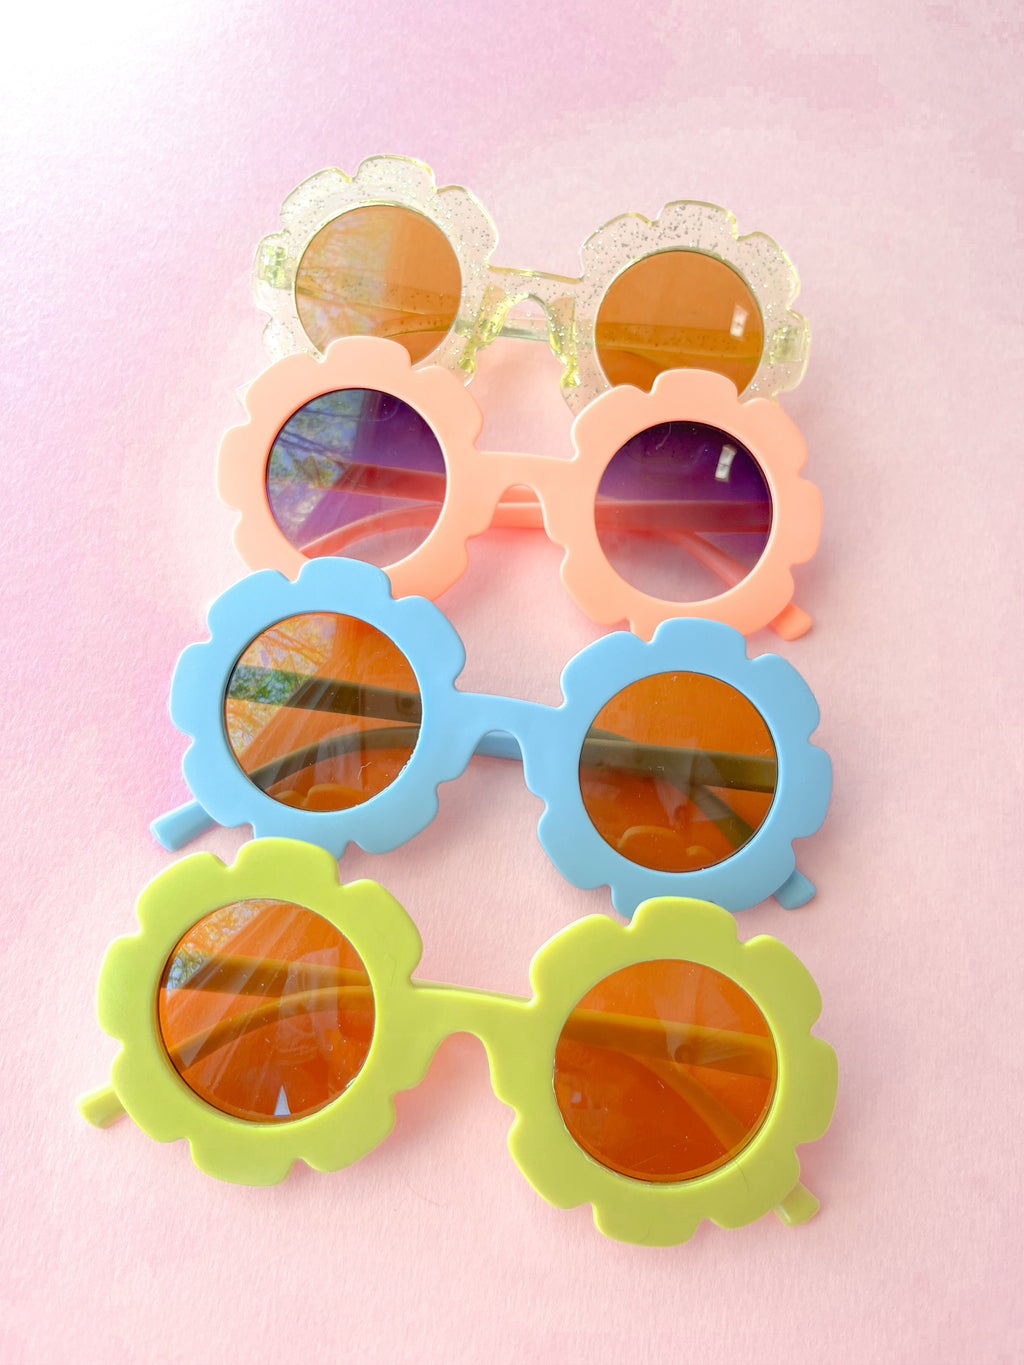 FREE Flower Sunnies when you purchase Swim Collection!